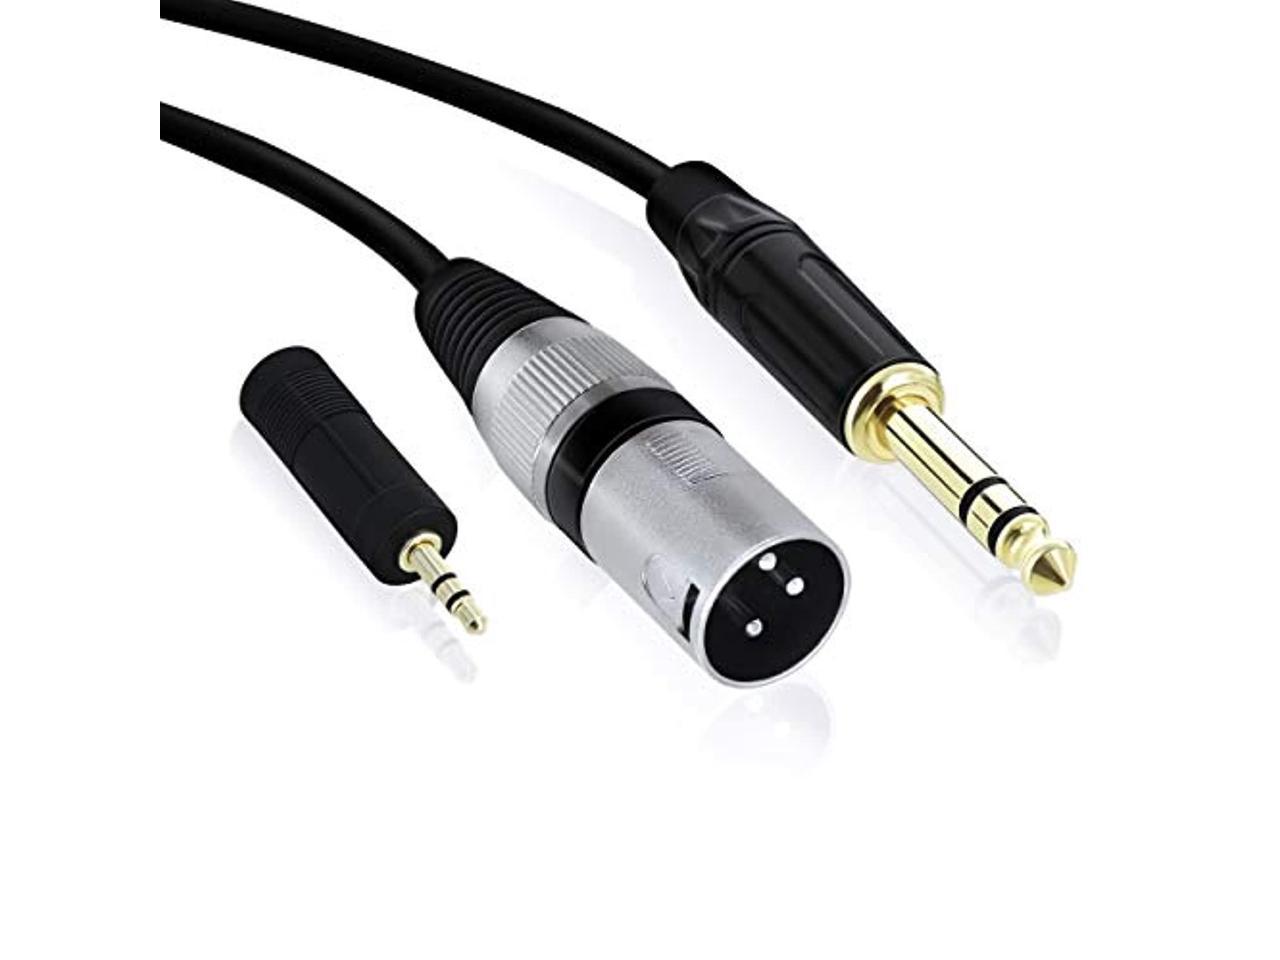 Mic Extension Cable GearIT XLR Male to Female Microphone Cable 3 Feet, 6-Pack Black 